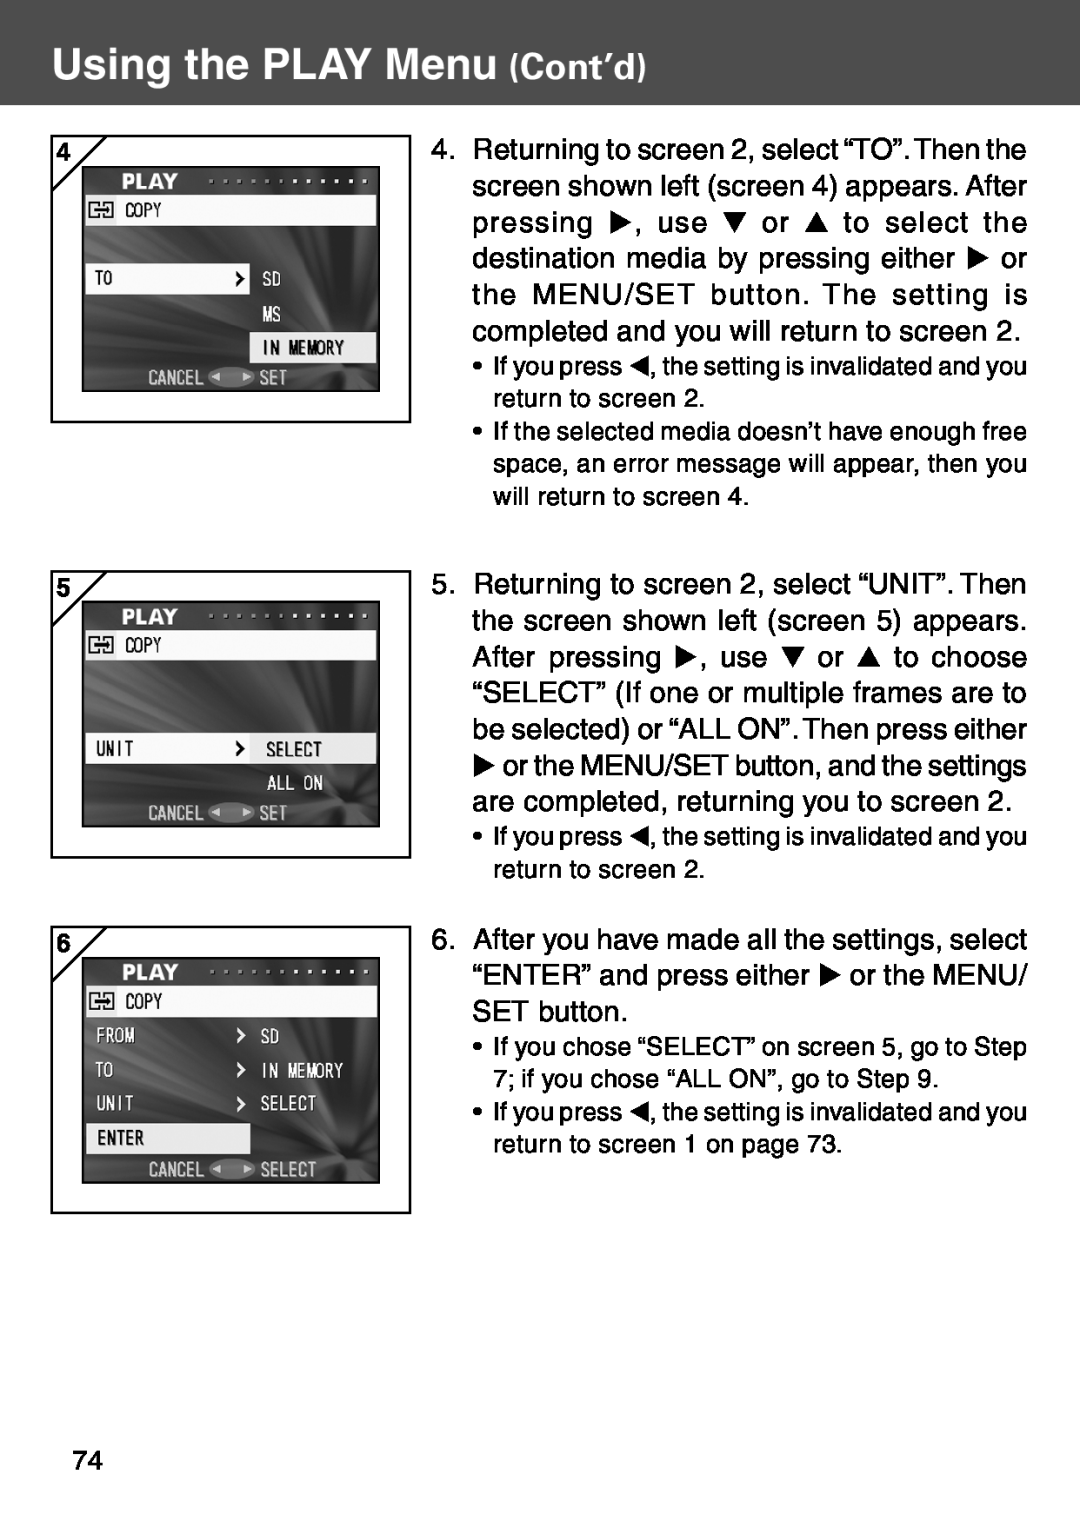 Konica Minolta KD-500Z user manual Using the PLAY Menu Cont’d, are completed, returning you to screen 